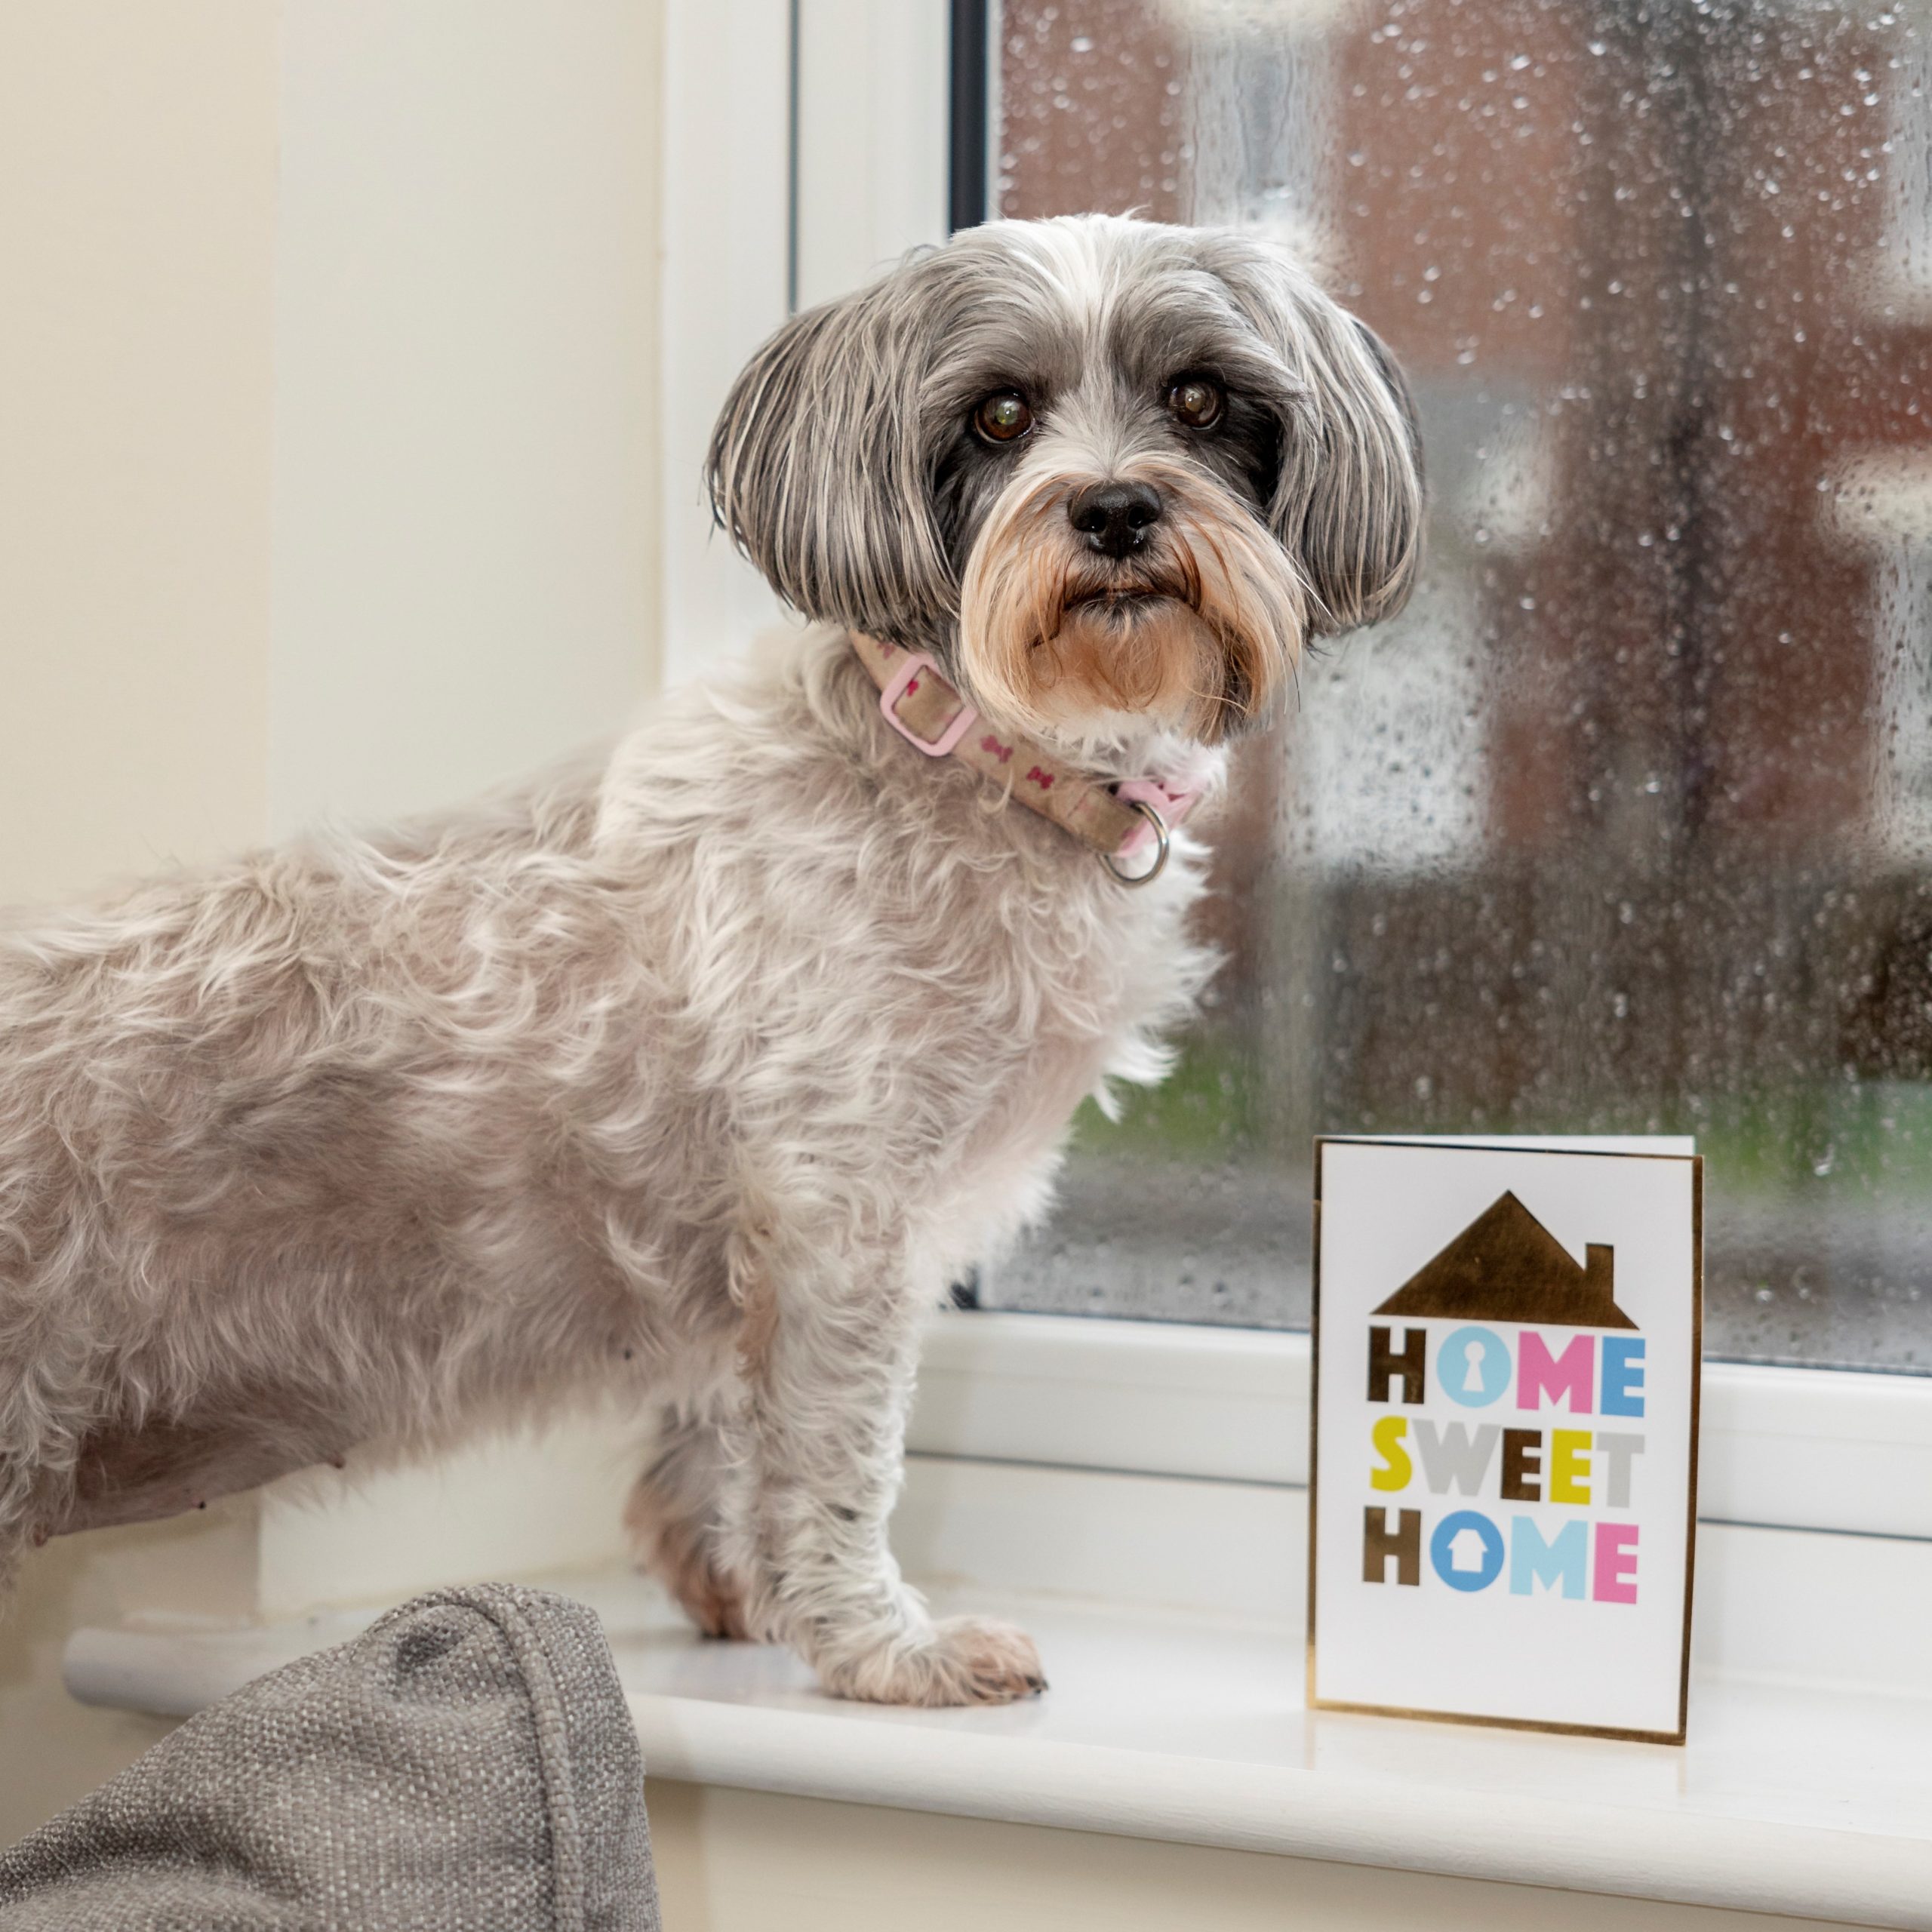 Small dog looks to camera standing next to a 'Home Sweet Home' celebration card